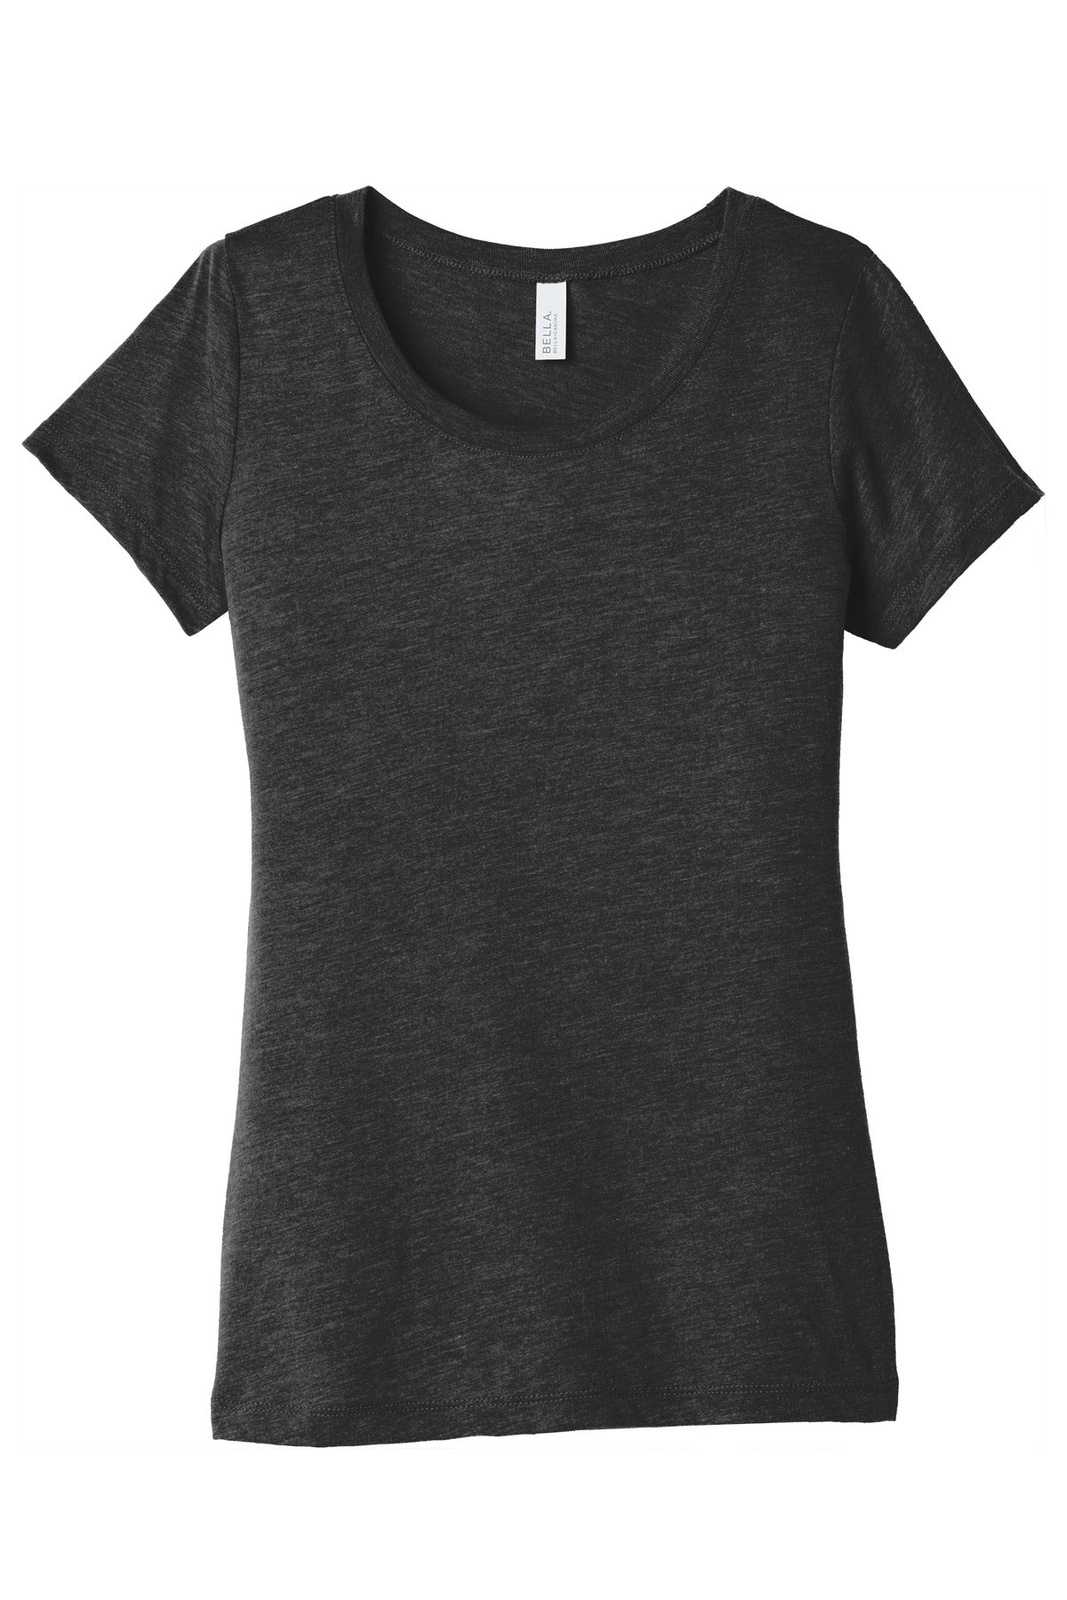 Bella + Canvas 8413 Women's Triblend Short Sleeve Tee - Charcoal-Black Triblend - HIT a Double